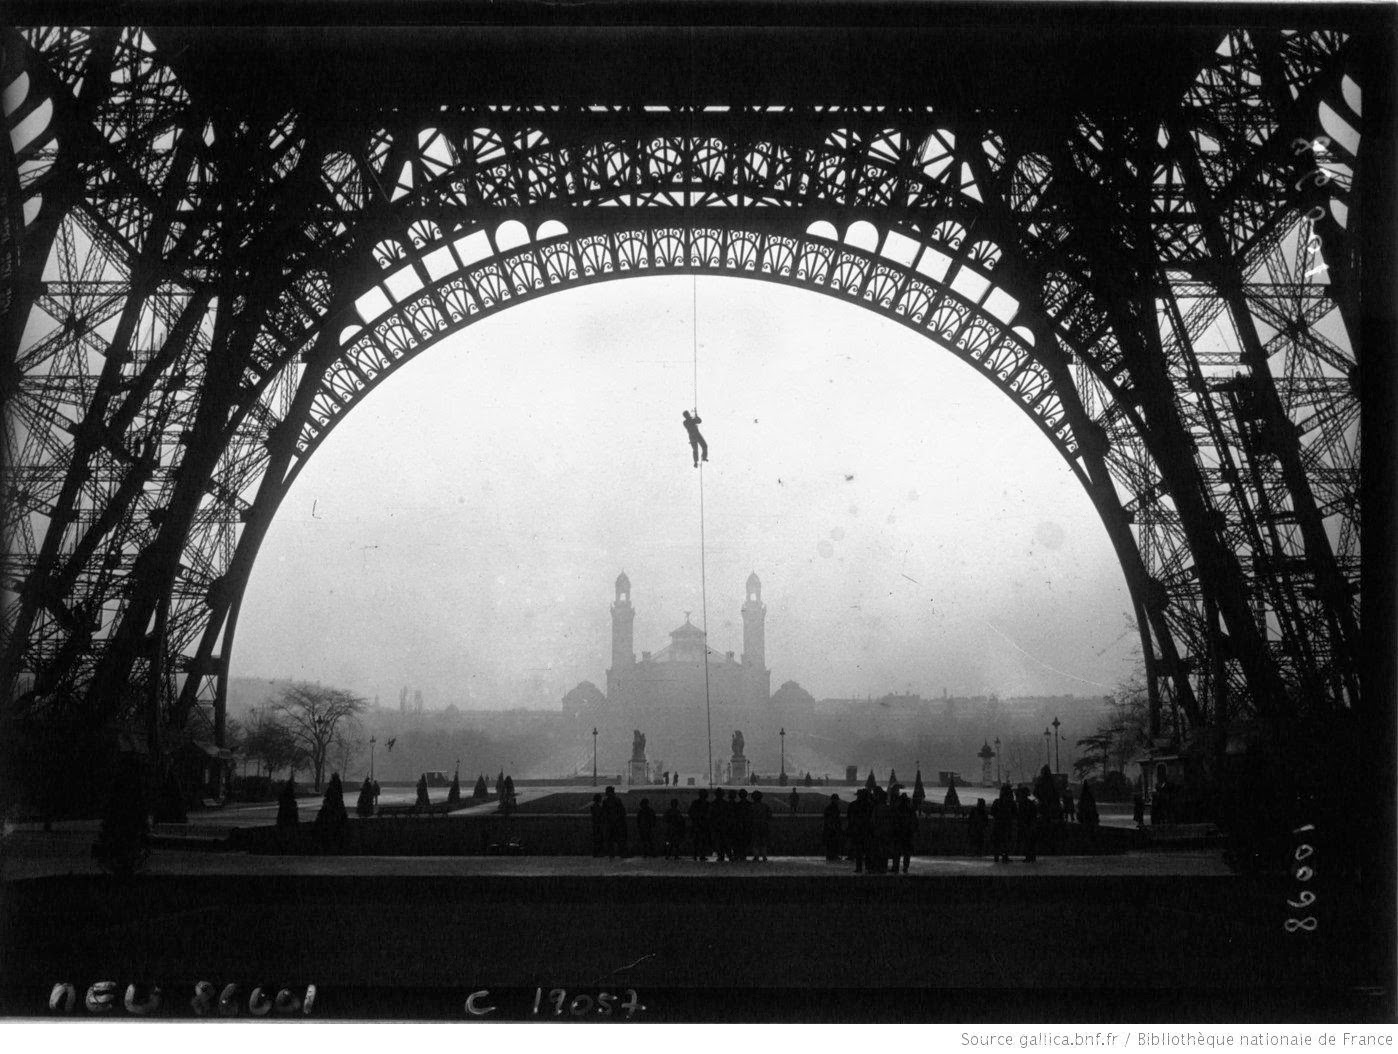 Stunning Image of Eiffel Tower in 1921 